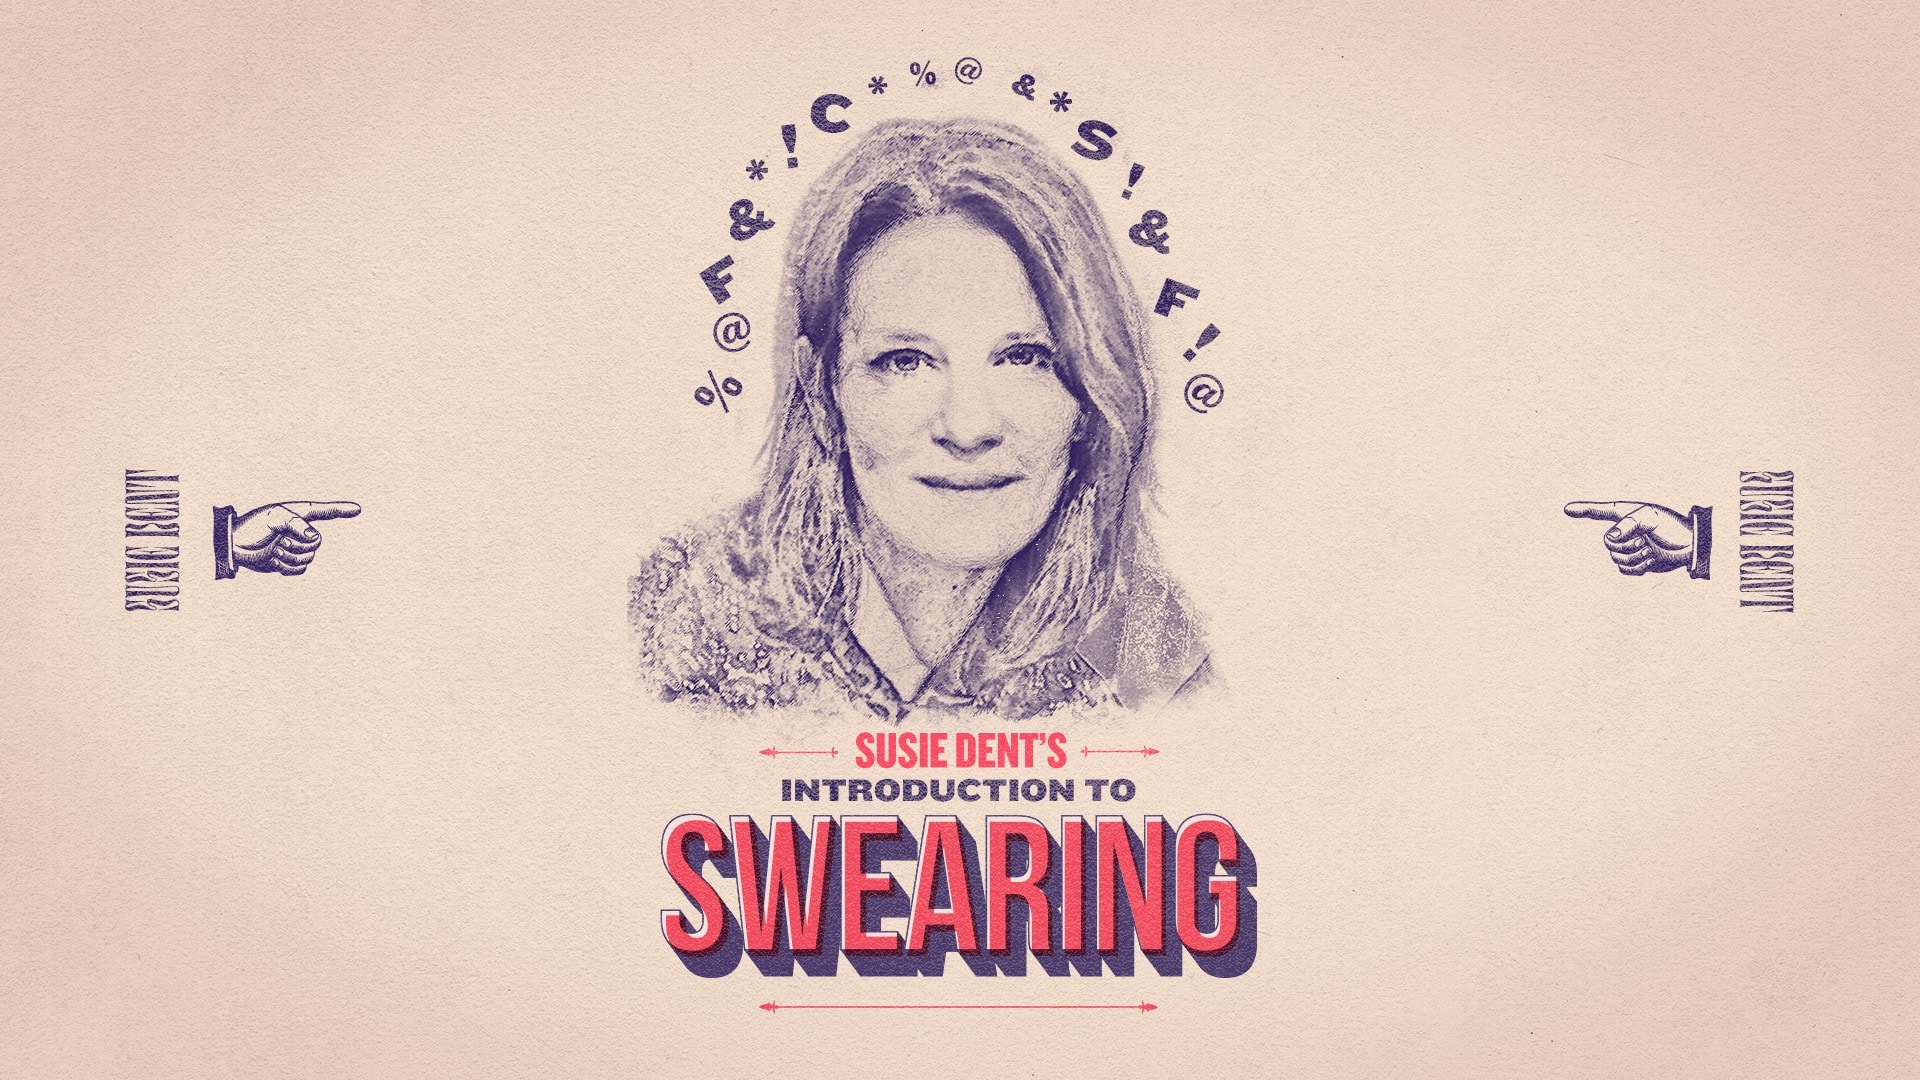 susie dent's introduction to swearing